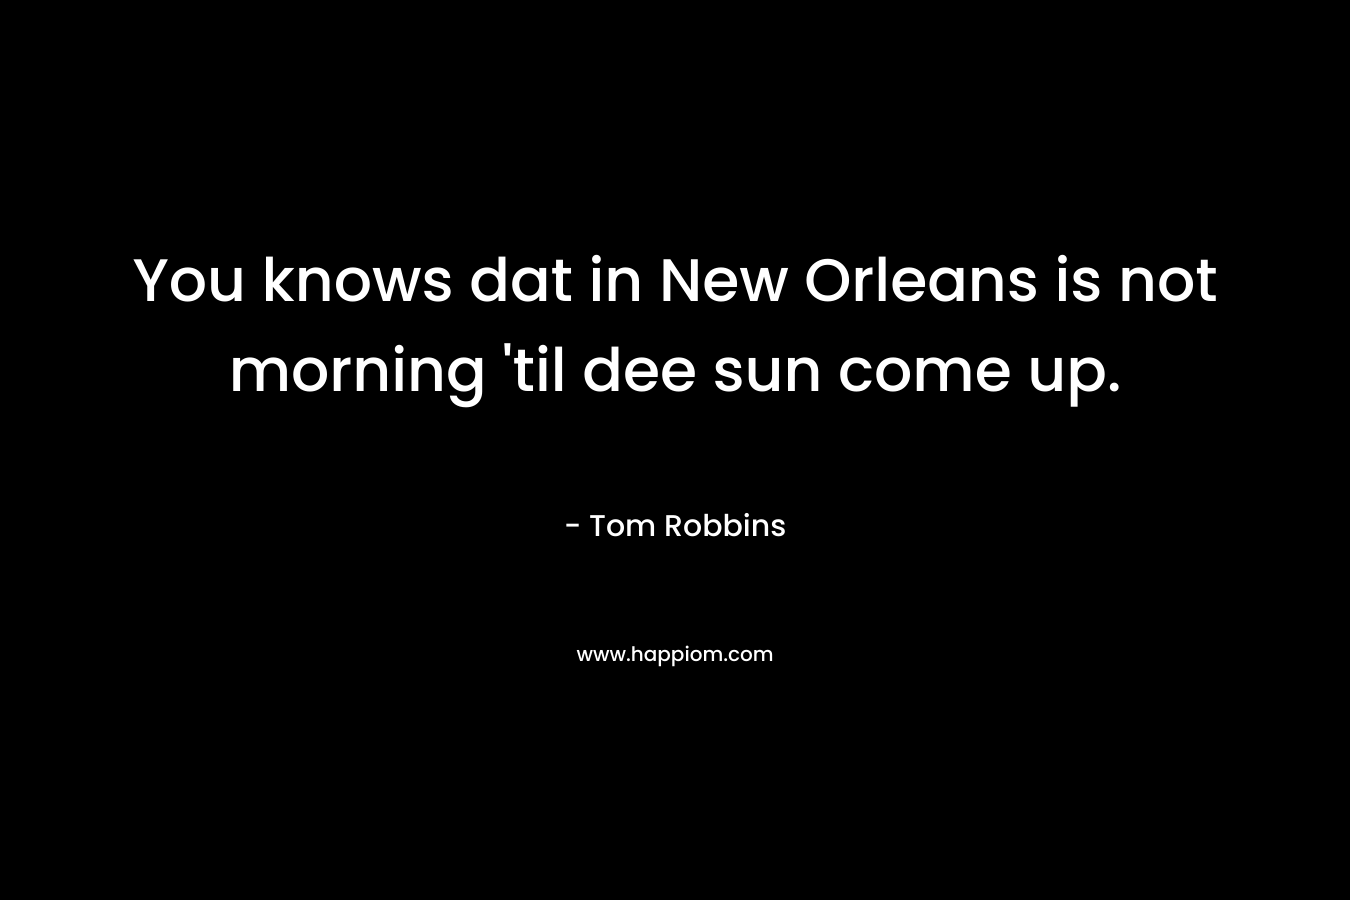 You knows dat in New Orleans is not morning ’til dee sun come up. – Tom Robbins